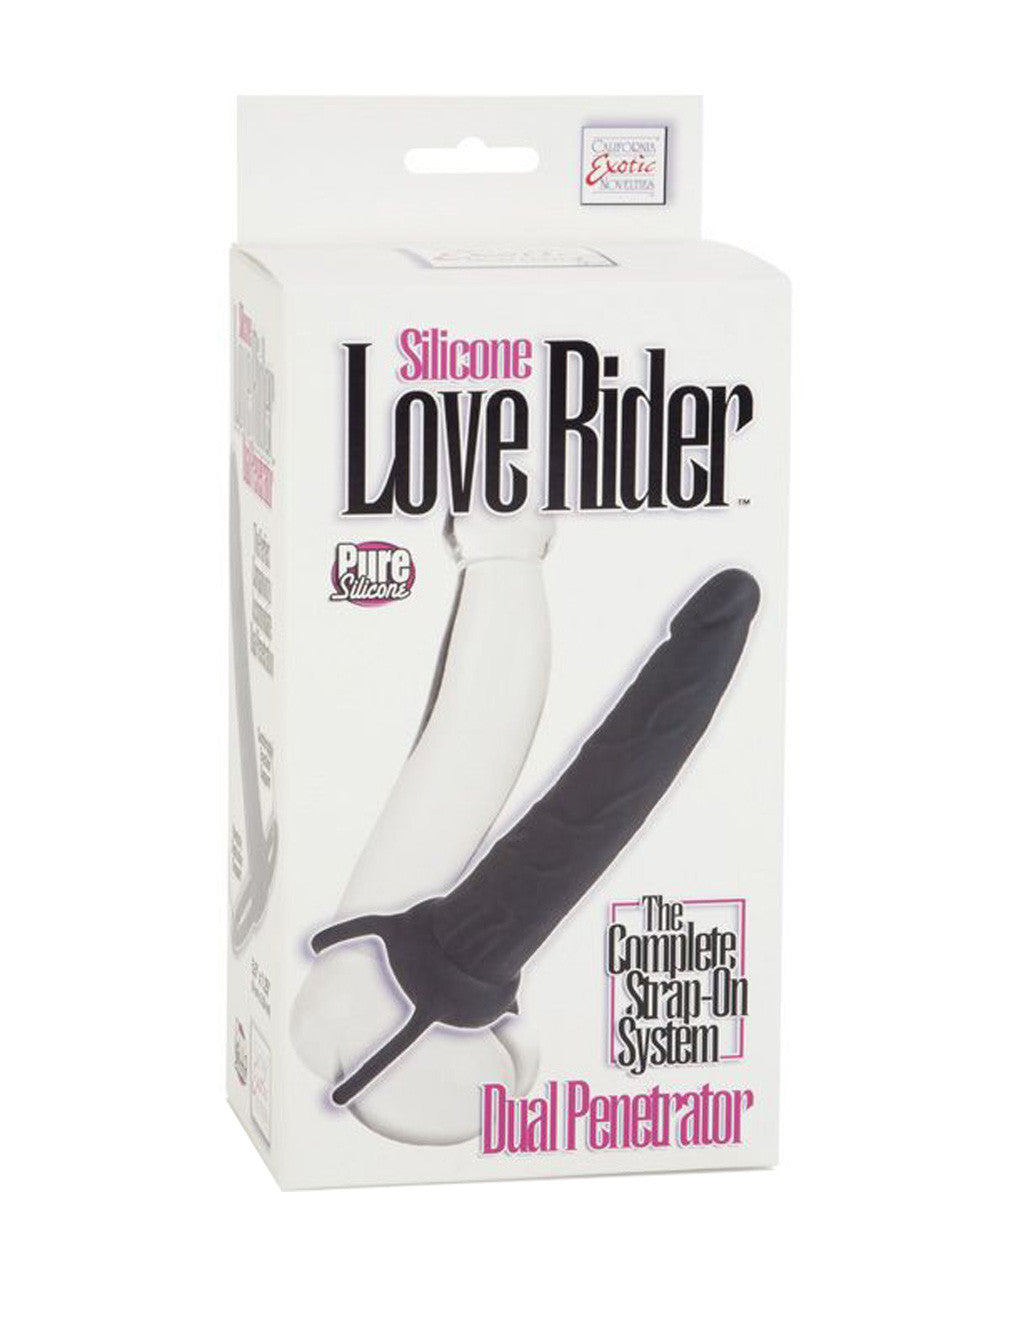 Love Rider Silicone Dual Penetrator Package